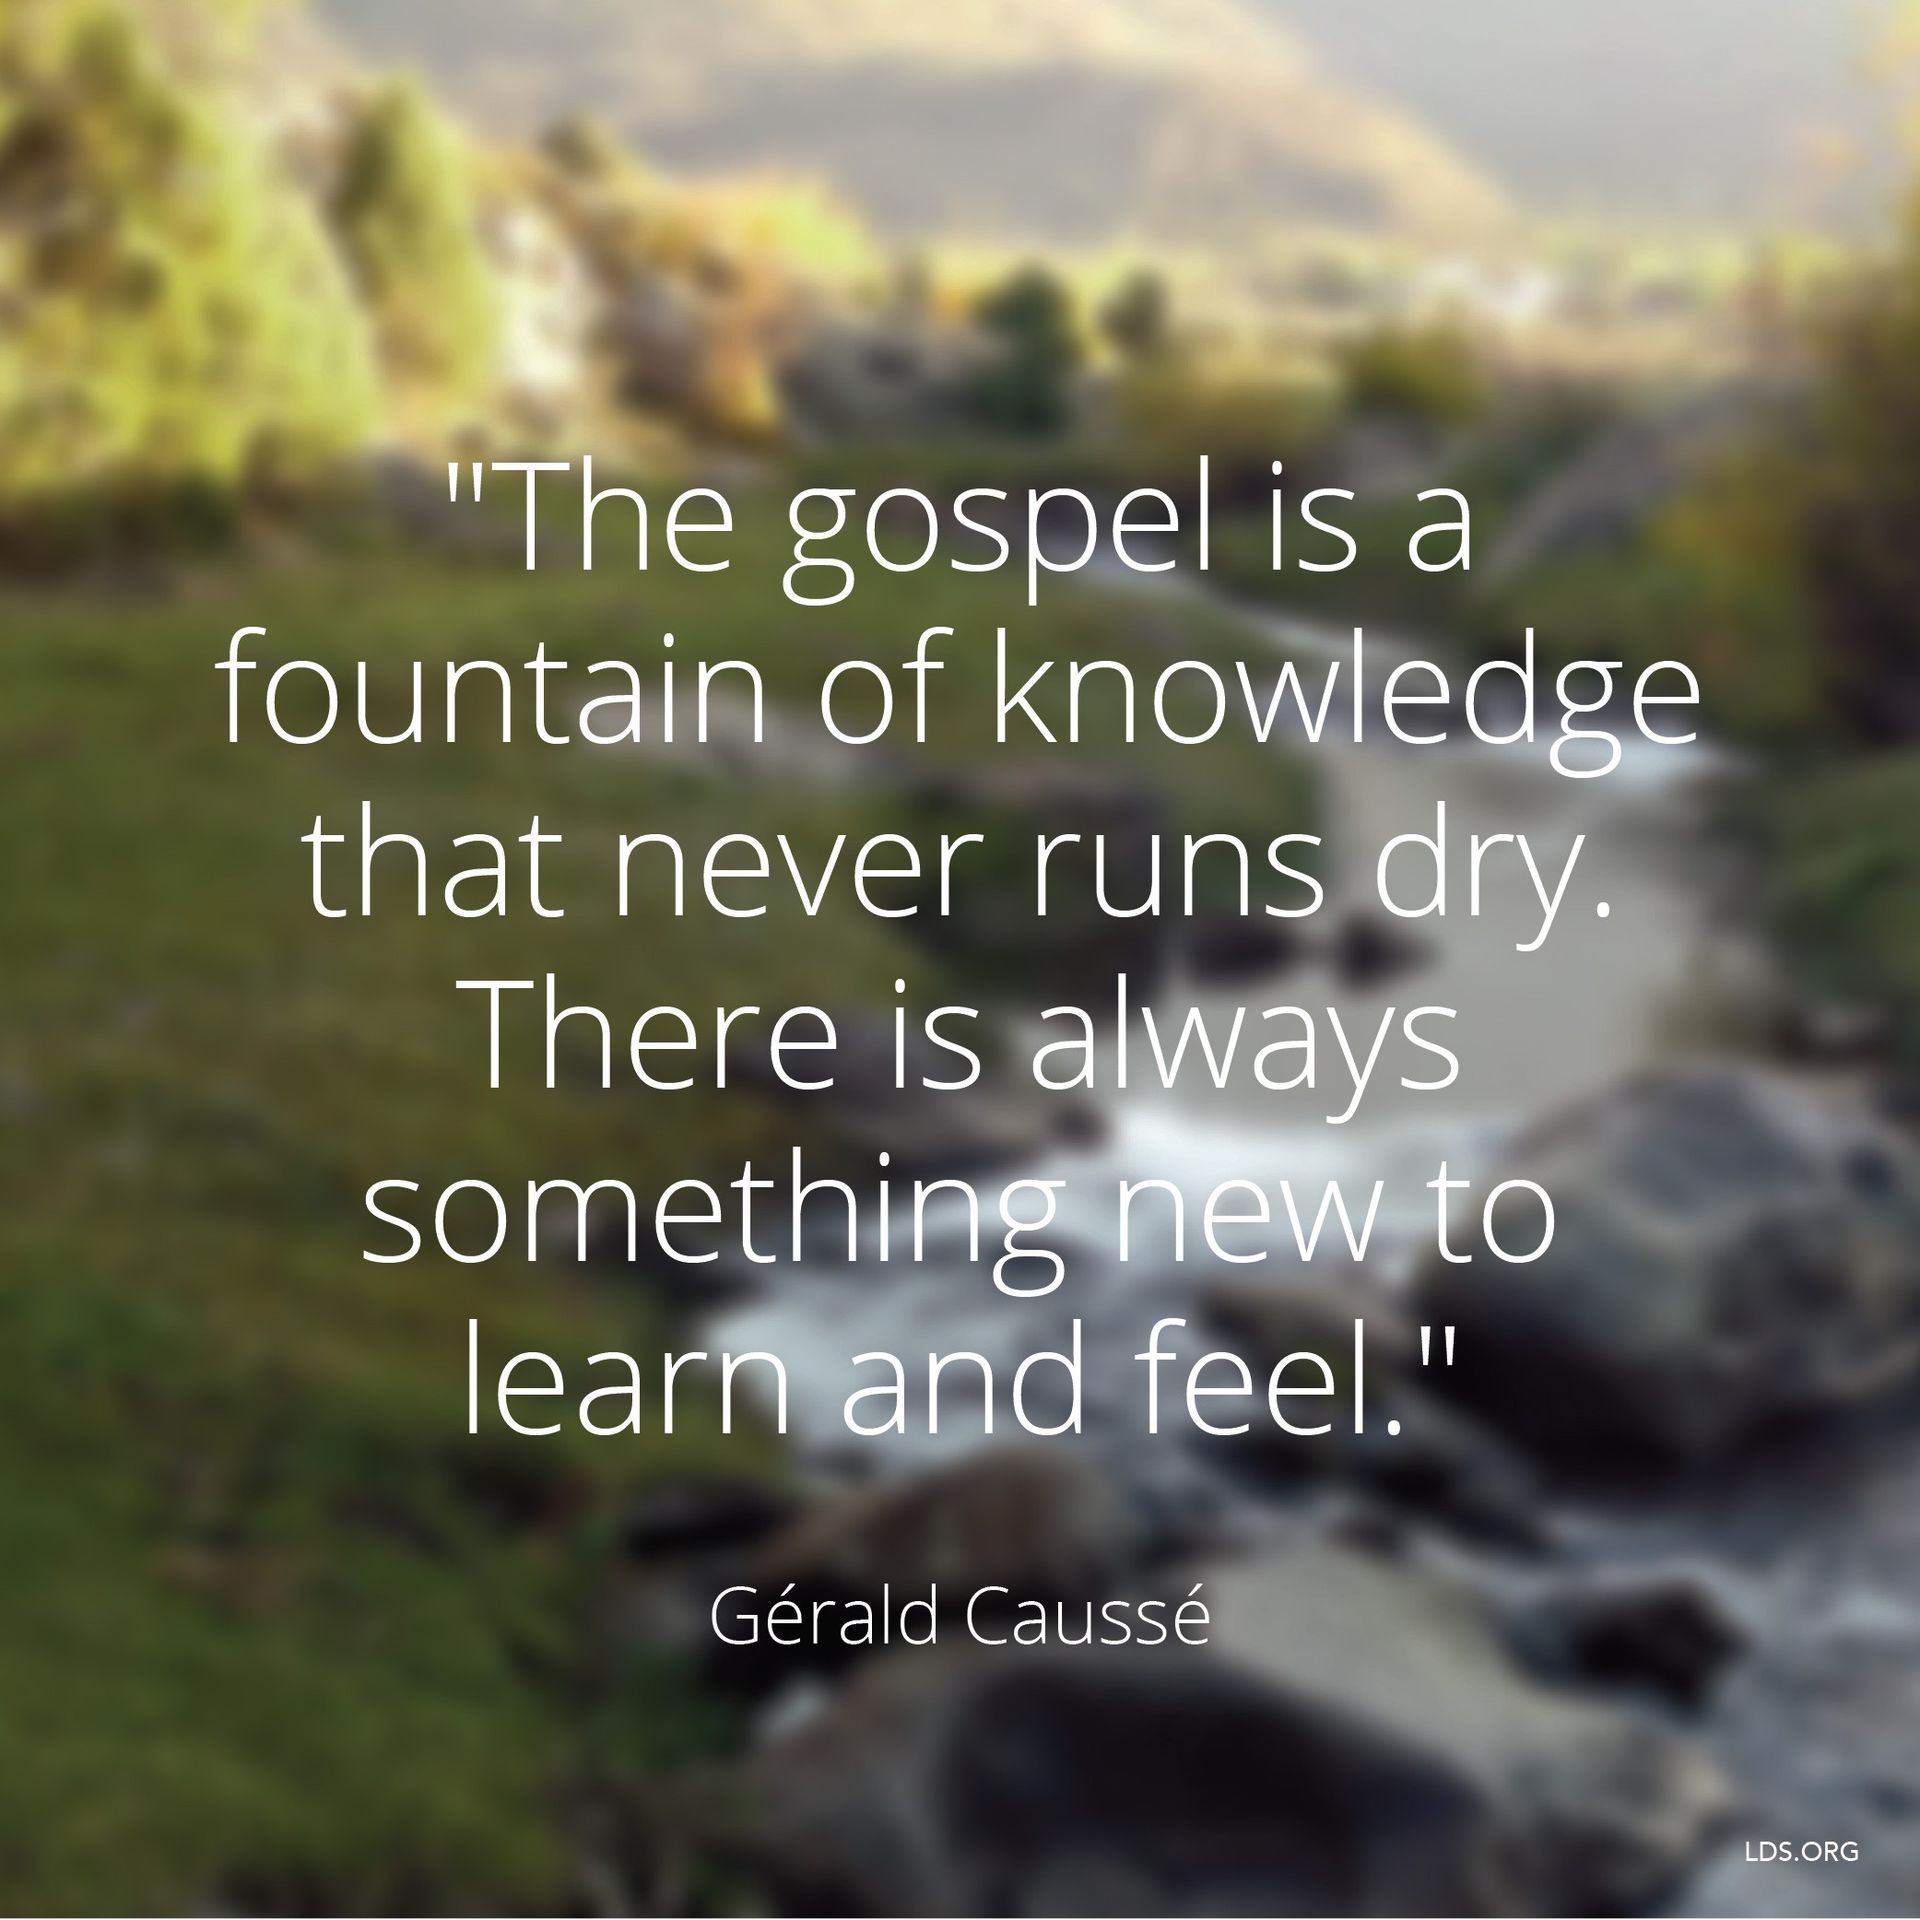 “The gospel is a fountain of knowledge that never runs dry. There is always something new to learn and feel.”—Bishop Gérald Caussé, “Is It Still Wonderful to You?” © undefined ipCode 1.